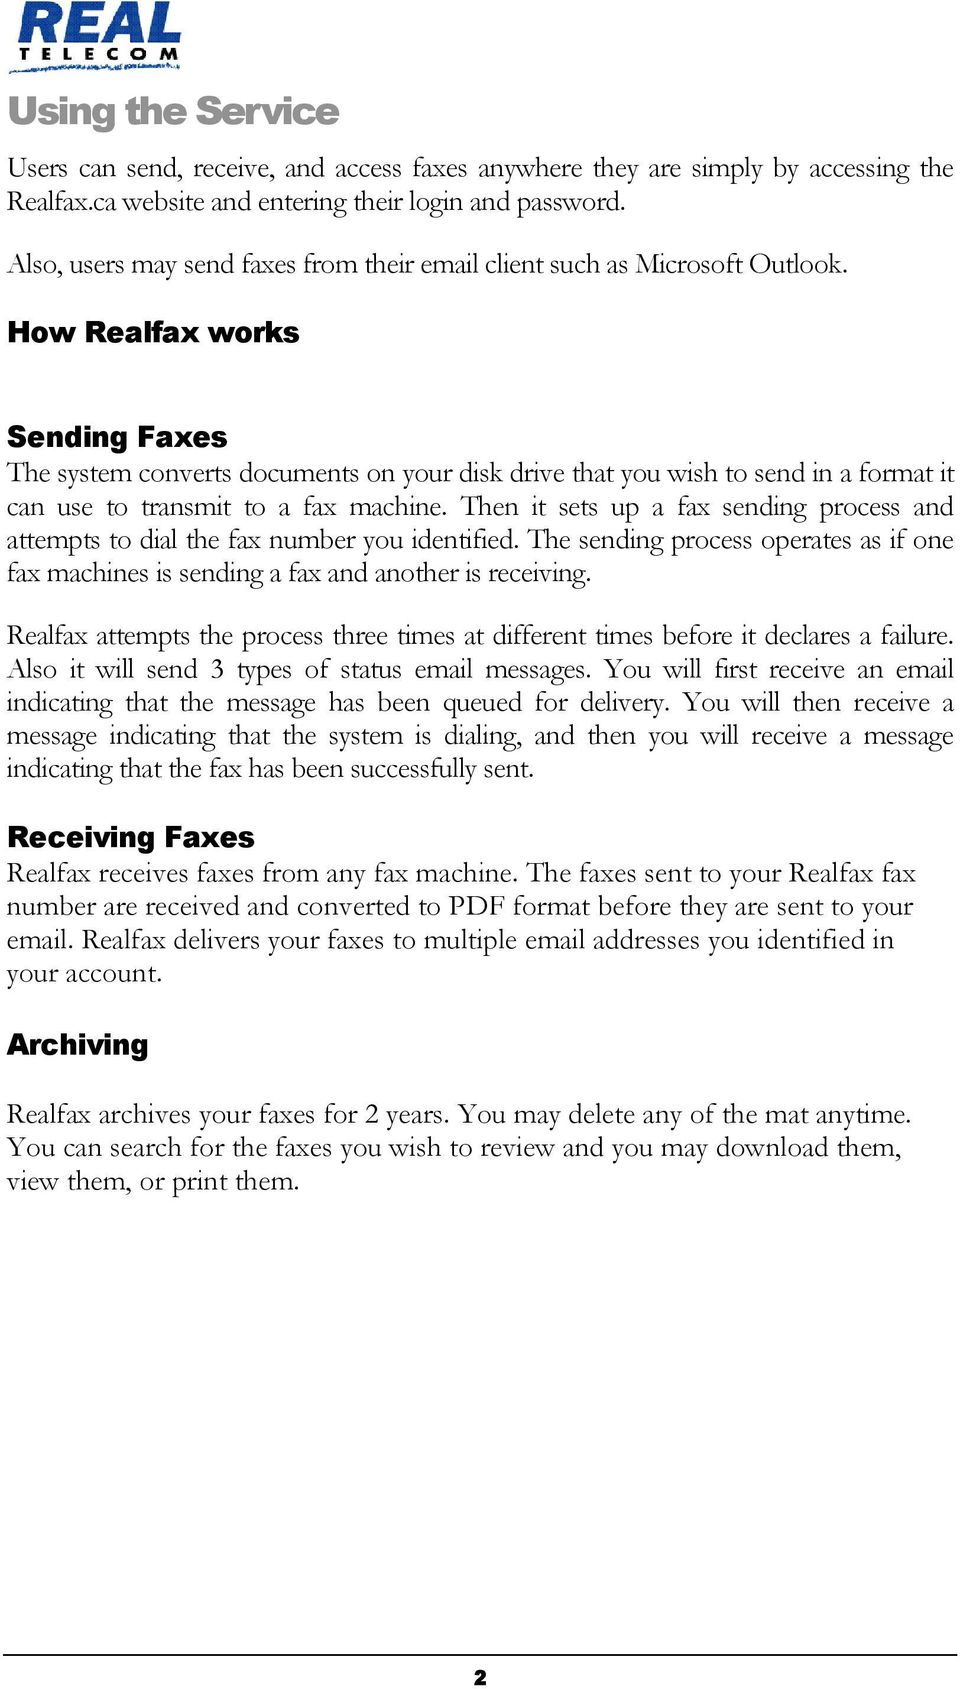 How Realfax works Sending Faxes The system converts documents on your disk drive that you wish to send in a format it can use to transmit to a fax machine.